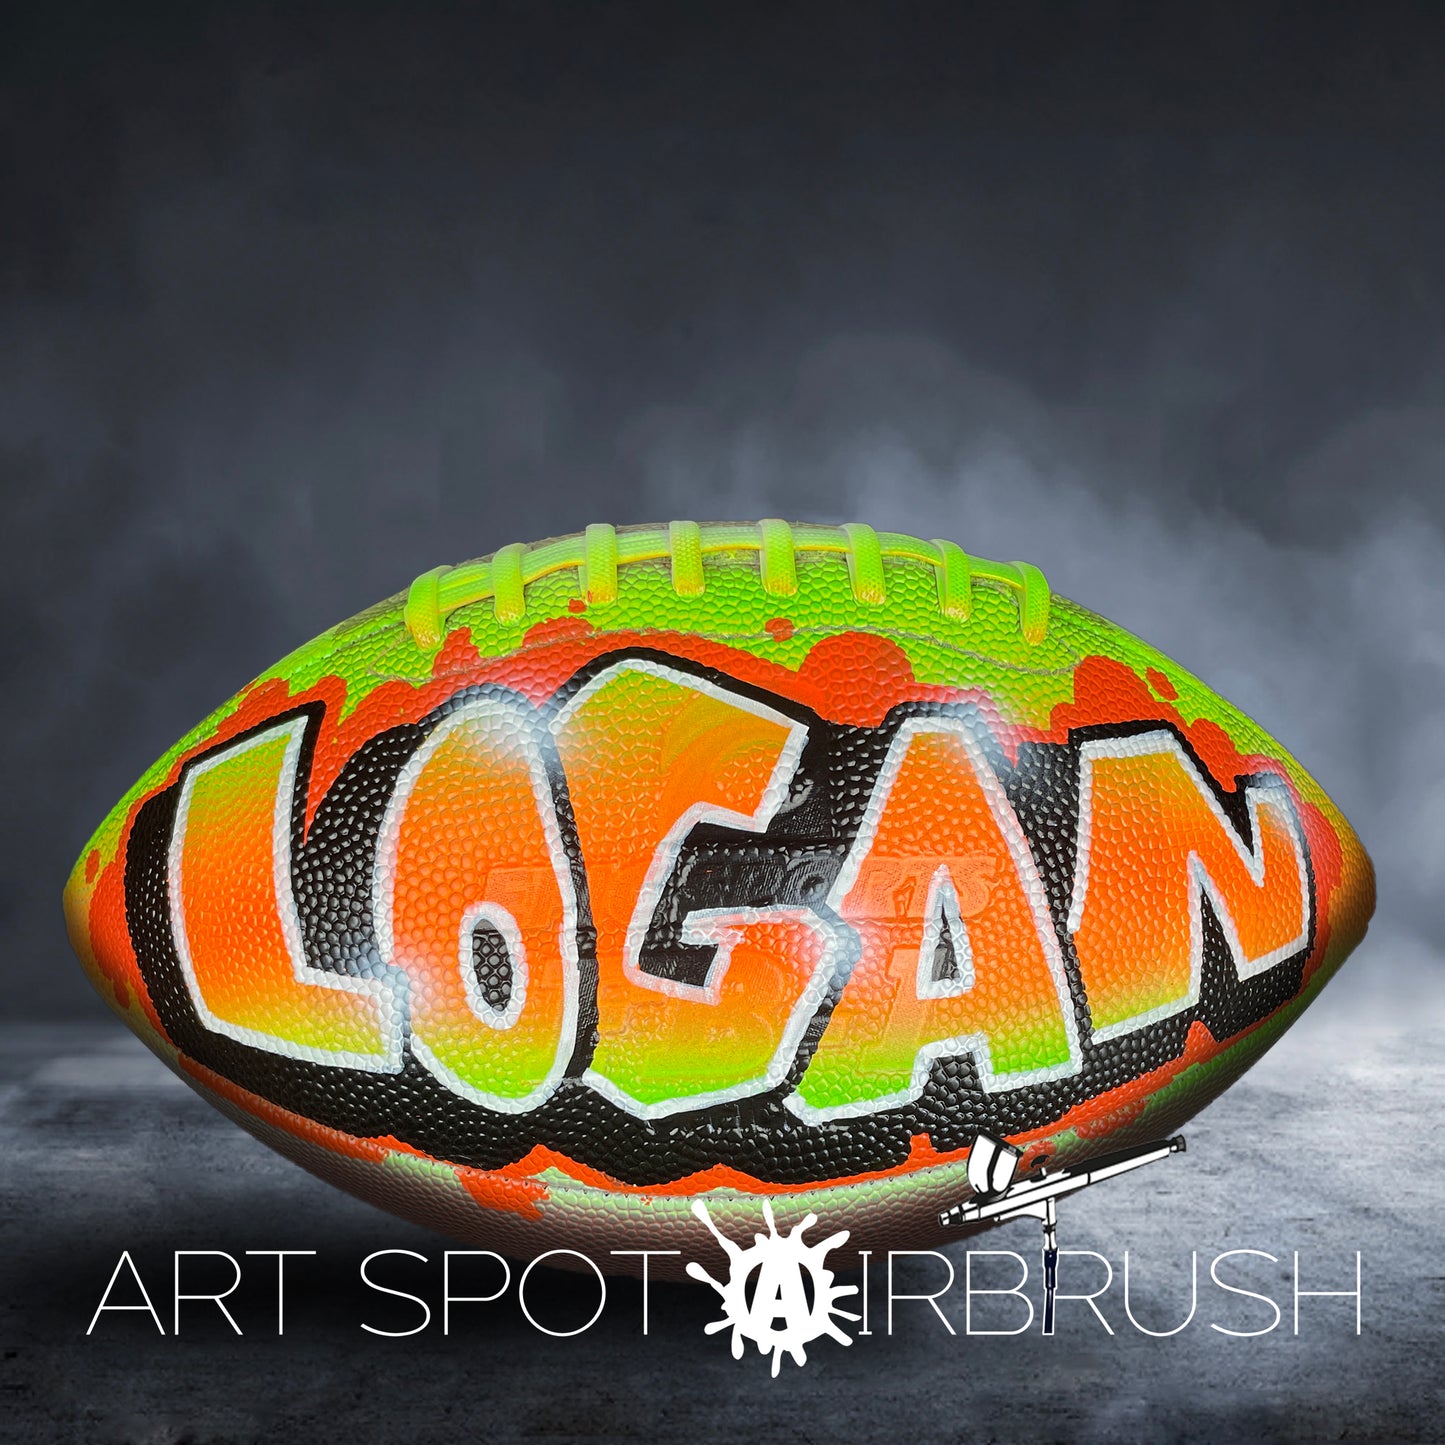 Personalized Football with Name in Graffiti